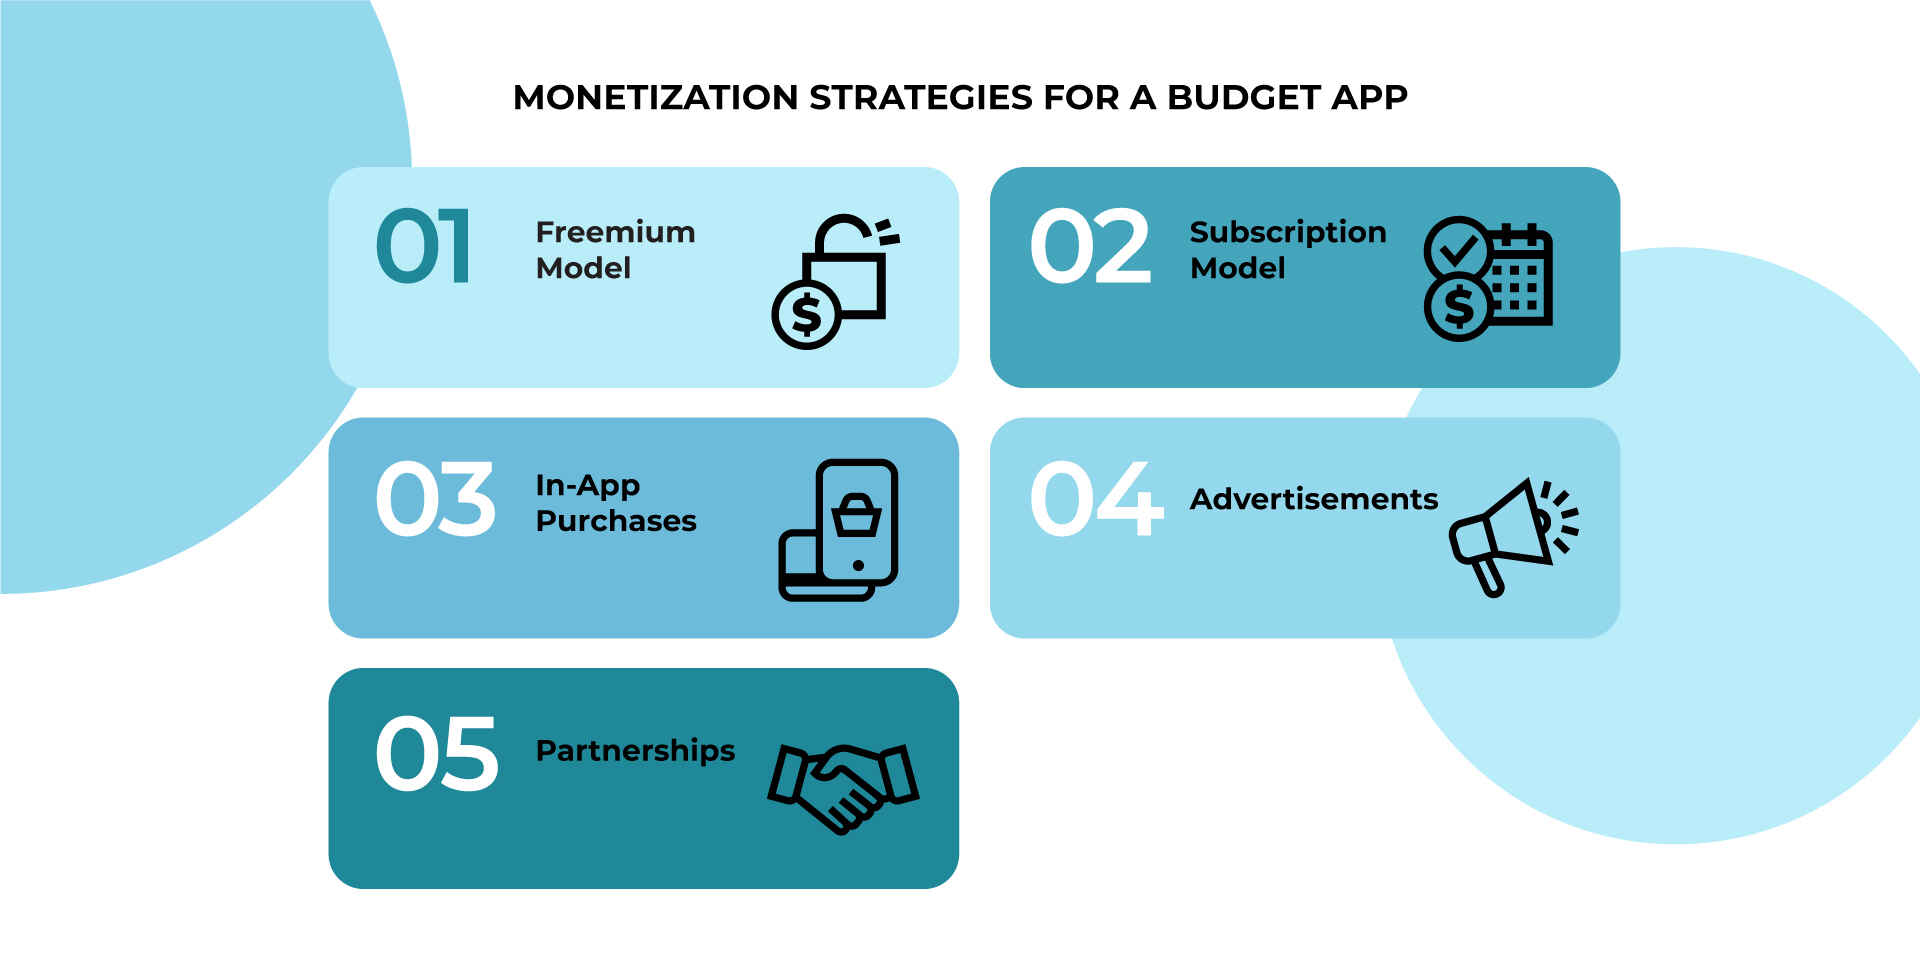 The main monetization strategies for a budget app.